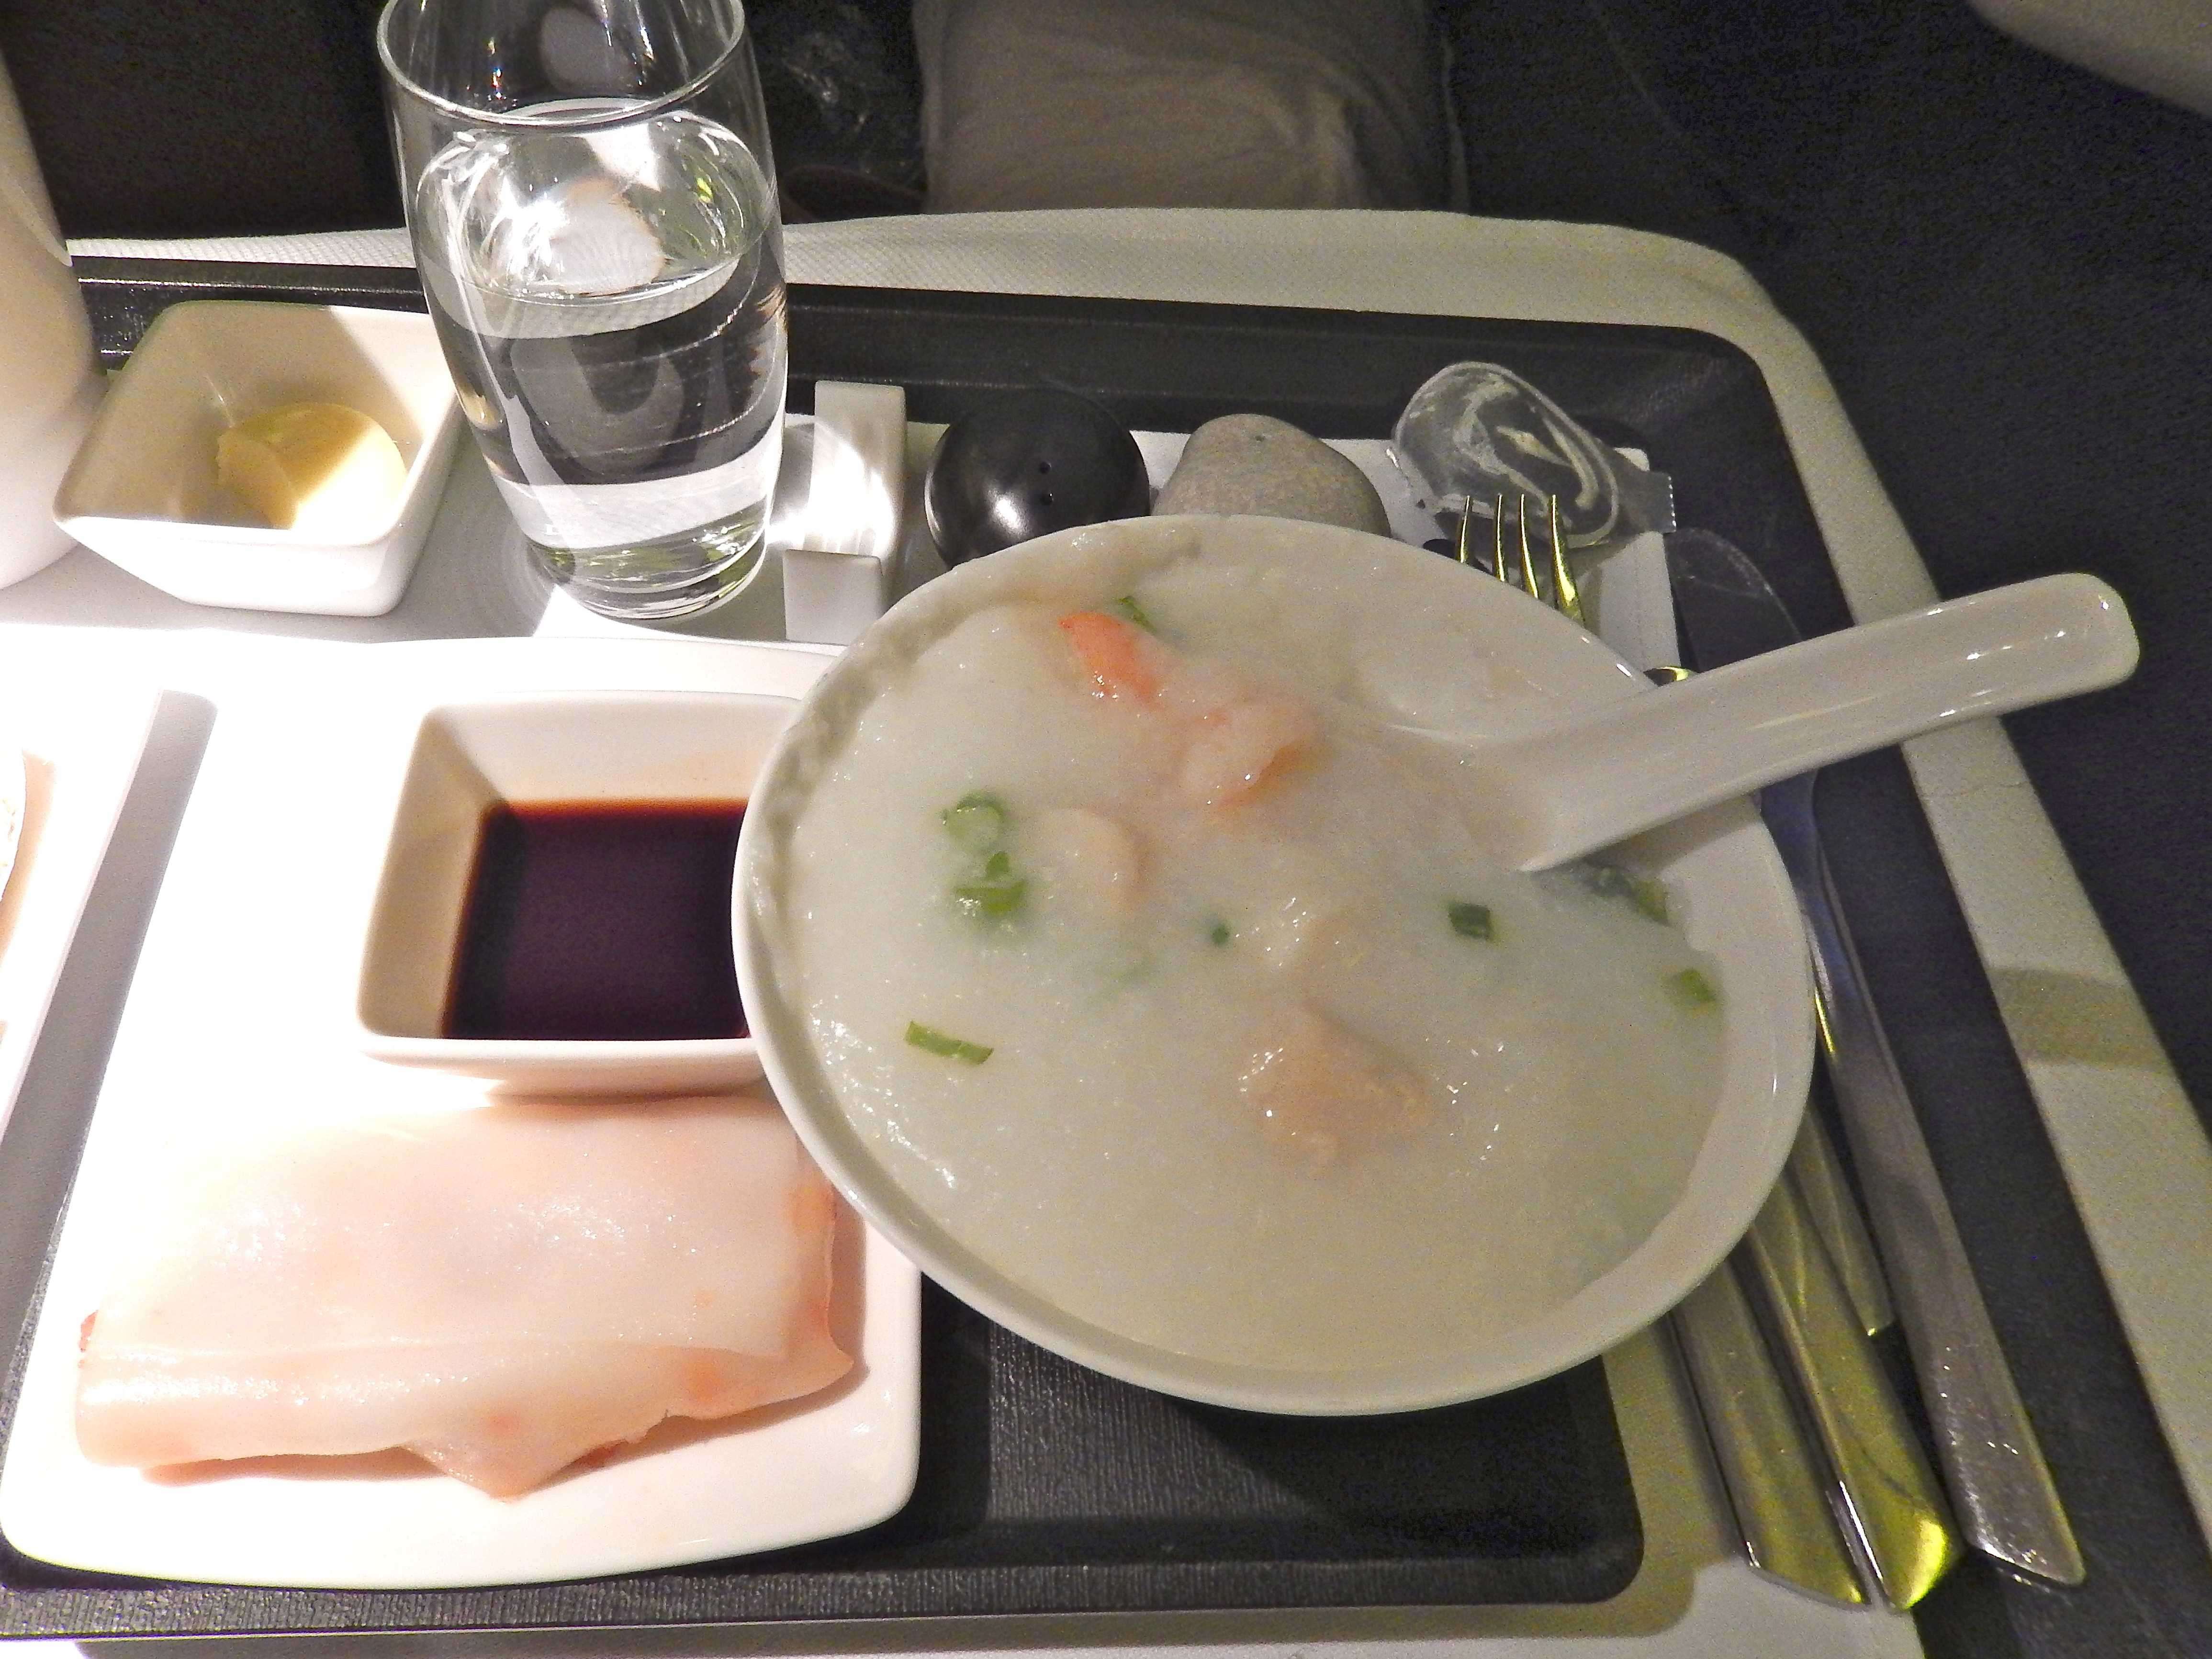 Or opt for a more traditional Chinese breakfast of congee, a Chinese